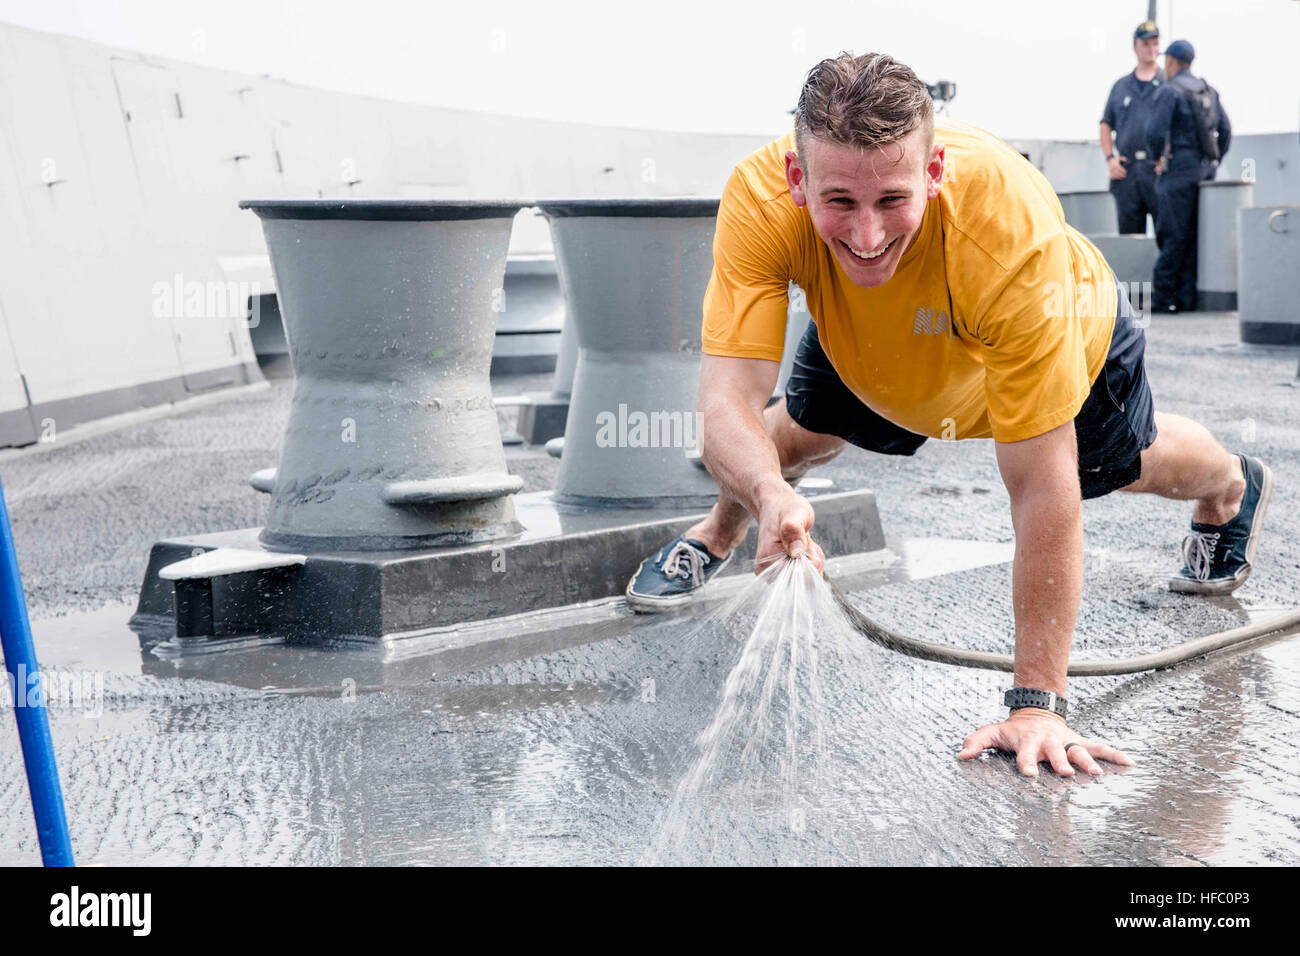 SASEBO, Japan (Aug. 4, 2016) Lt. Brennan Hosack sprays water on the forecastle of the amphibious transport dock ship USS Green Bay (LPD 20) during a freshwater wash-down. Green Bay is attached to the Bonhomme Richard Amphibious Ready Group and is currently underway conducting preparations for an upcoming deployment to the U.S. 7th Fleet area of operations. (U.S. Navy photo by Mass Communication Specialist 1st Class Chris Williamson/Released) Green Bay Underway Conducting Sea Trials 160804-N-JH293-109 Stock Photo